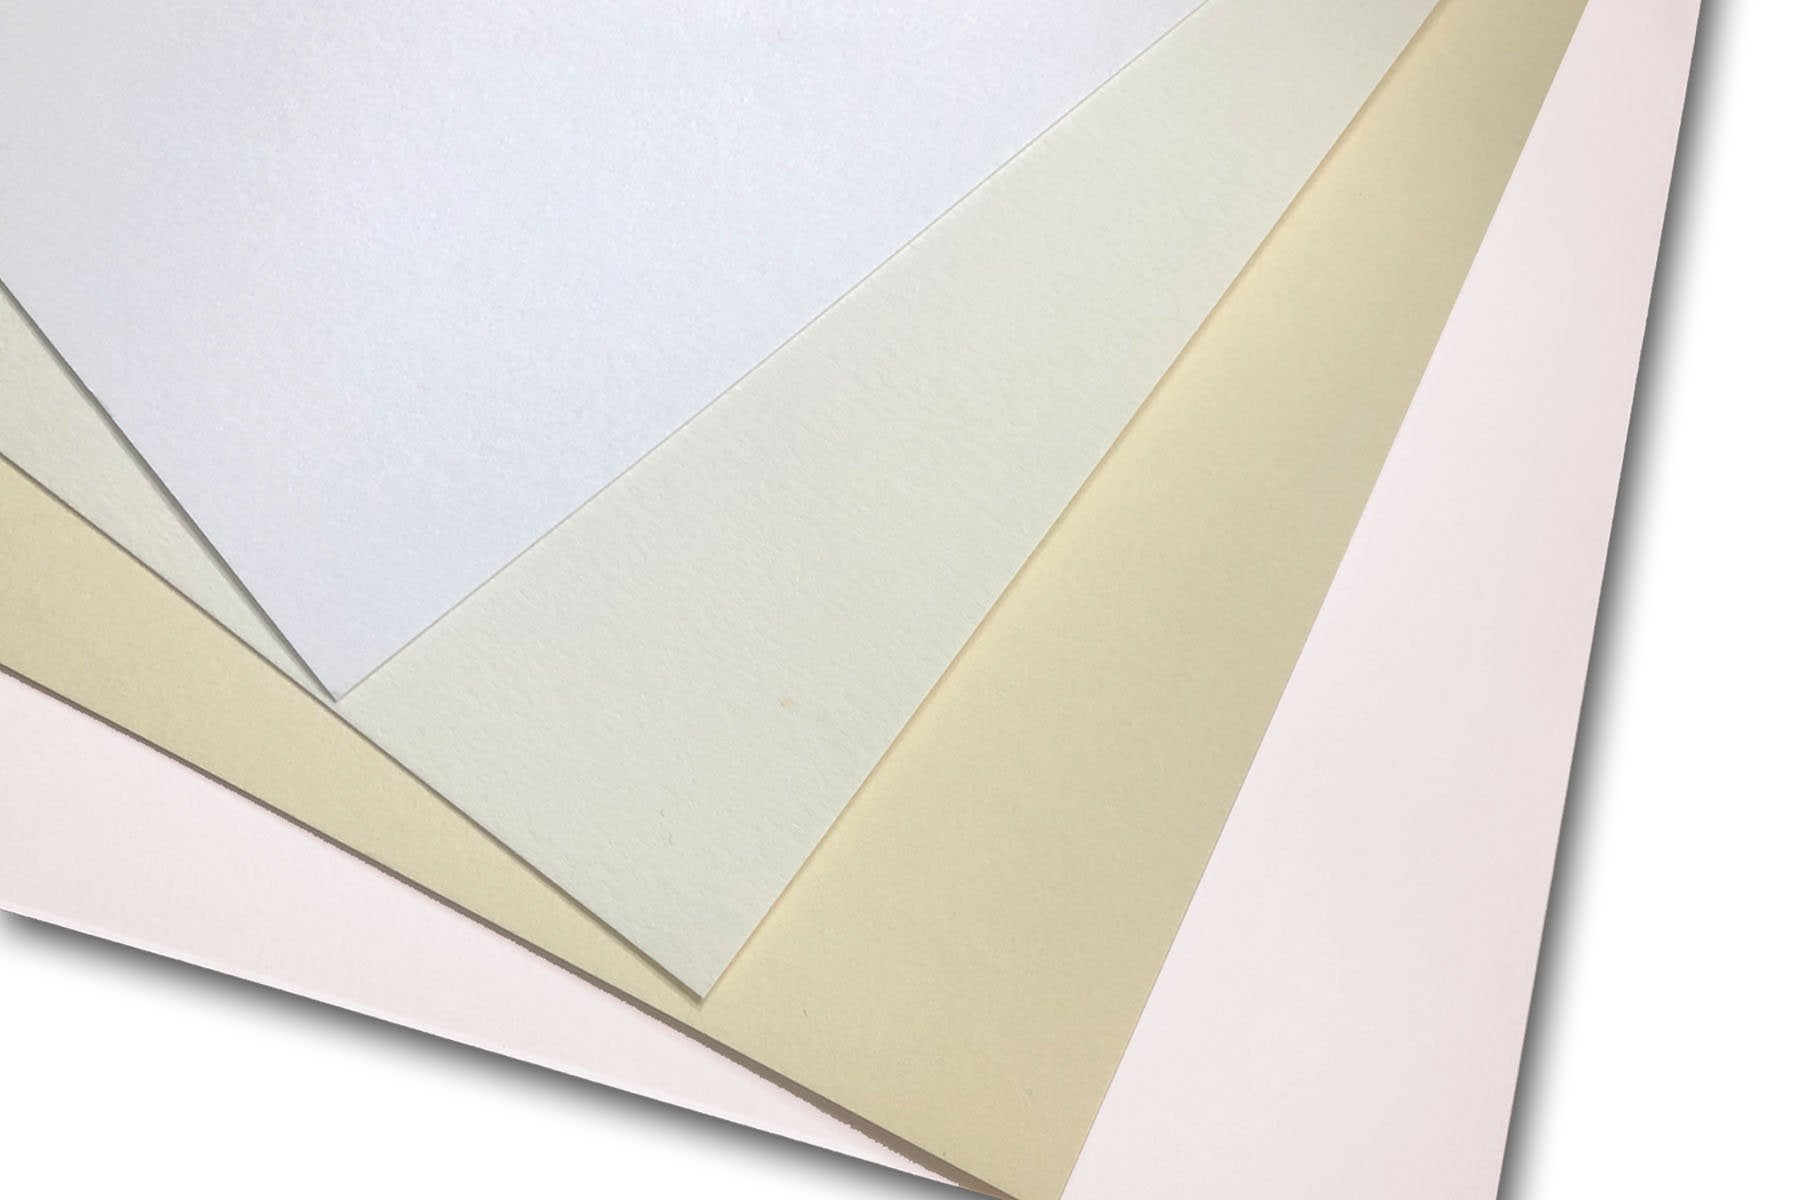 Neenah Cotton Papers: 100% Cotton Paper for Letterpress & Printing